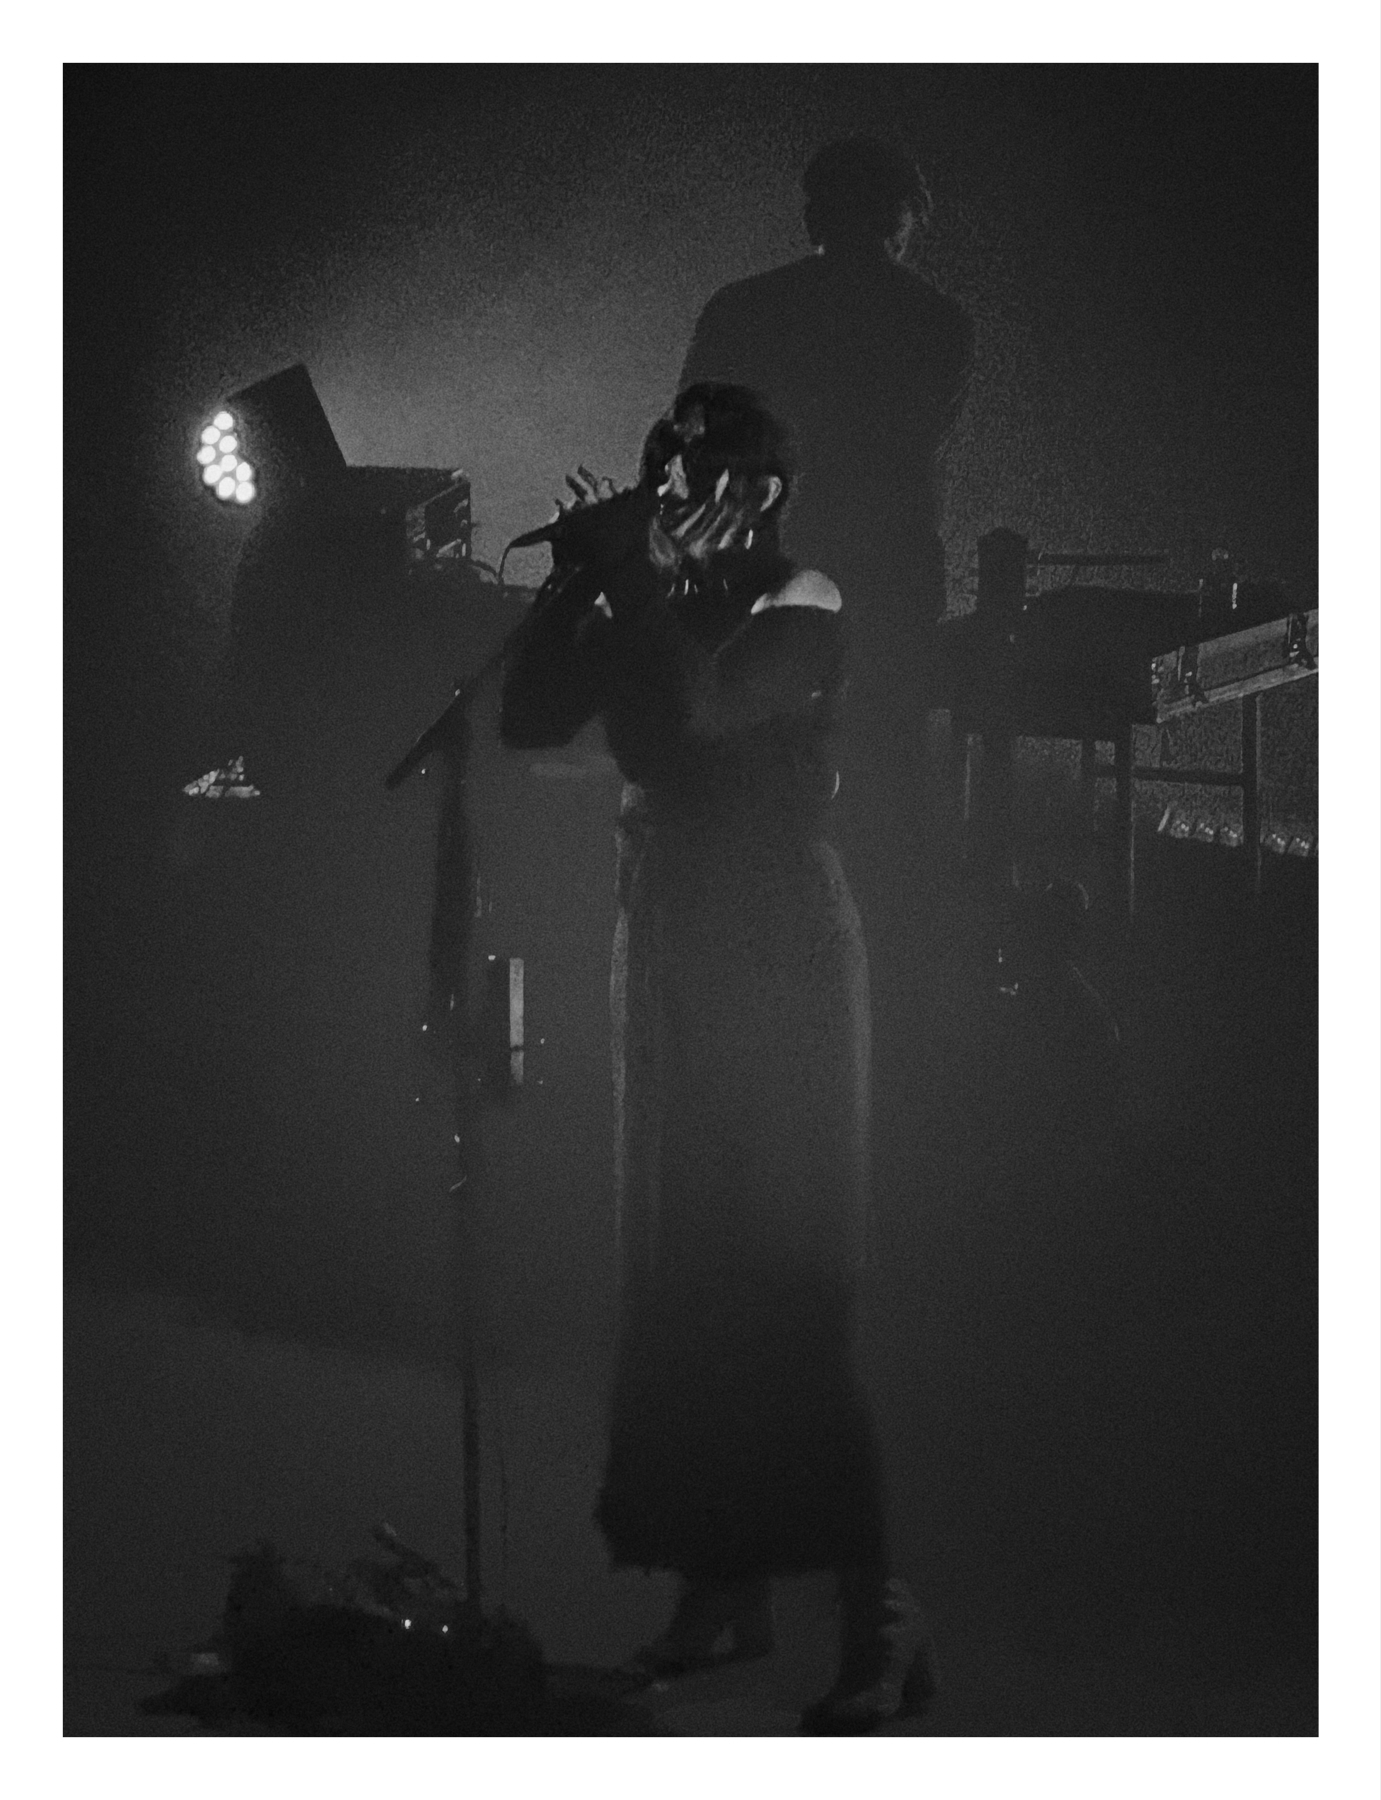 A black and white photo of Chelsea Wolfe singing into a microphone on a stage with dim lighting, with another person visible in the background.